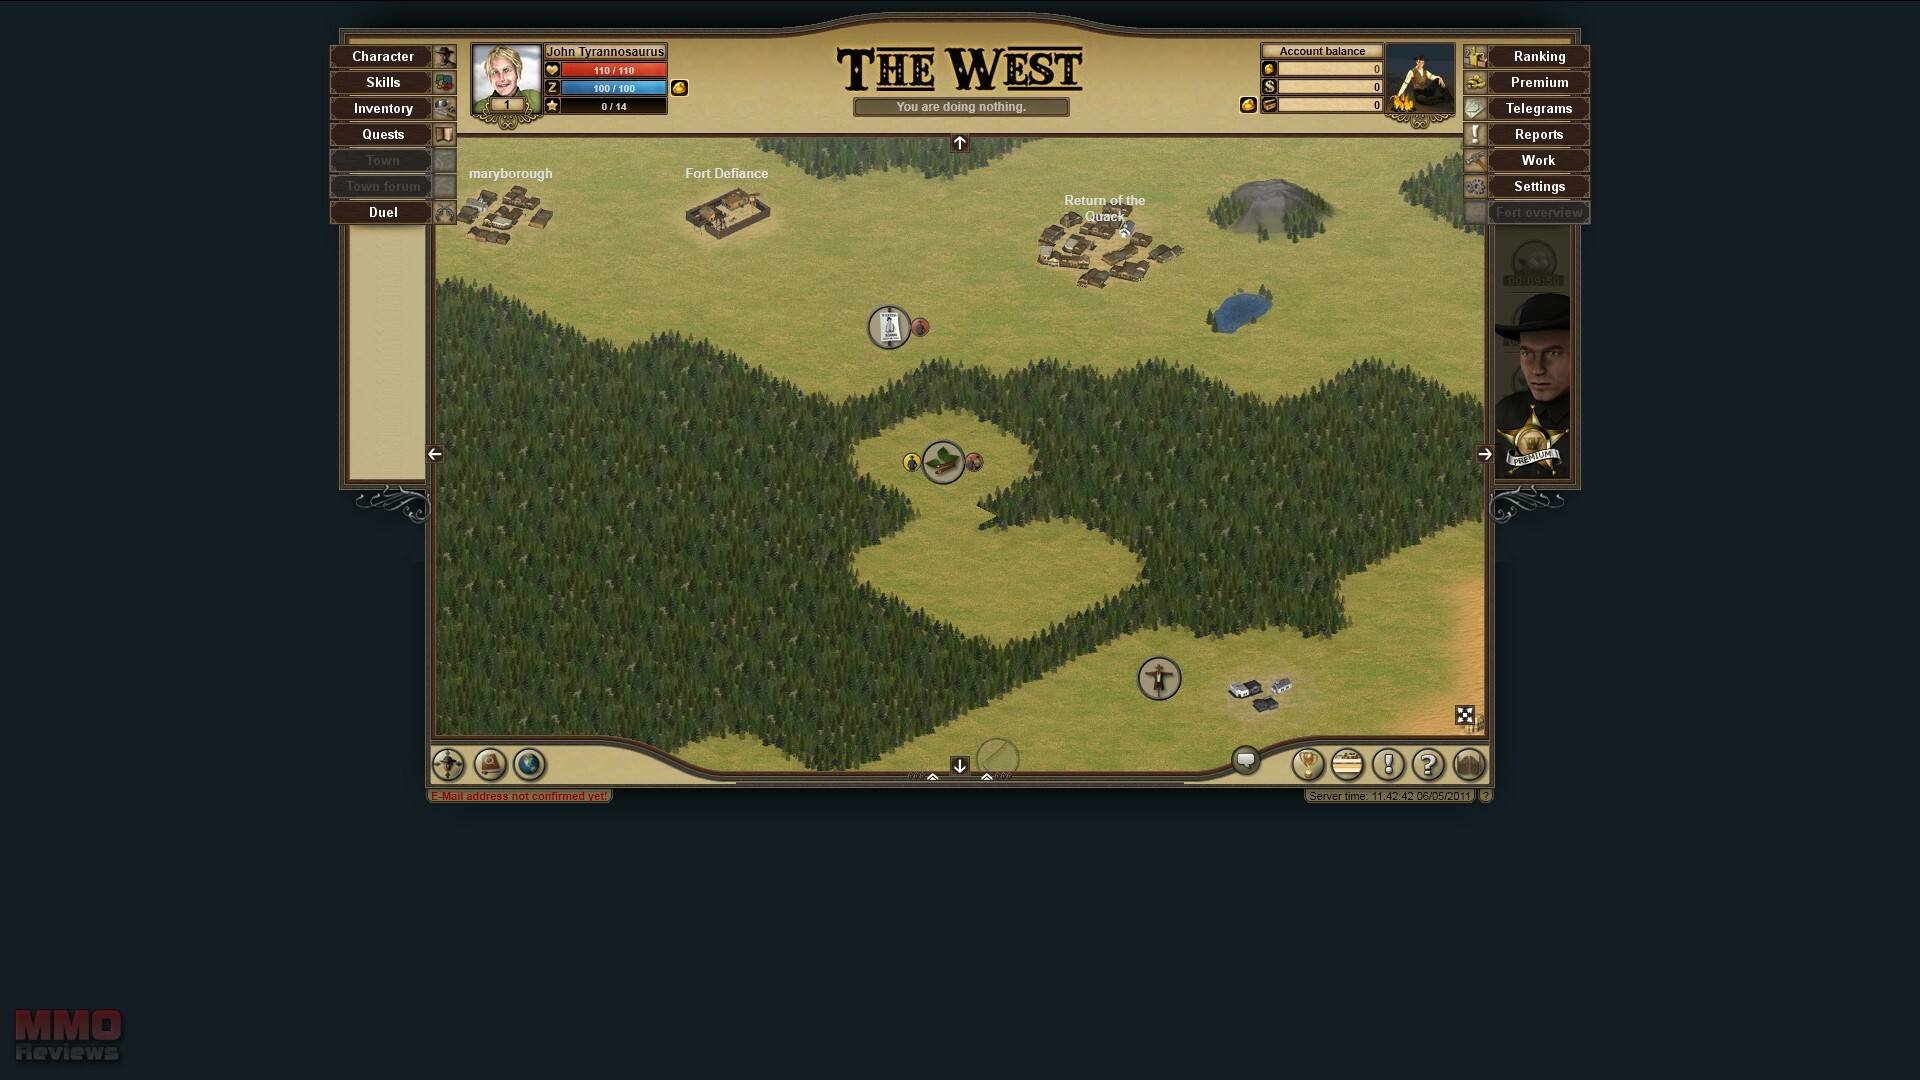 Wild West Dynasty instal the last version for windows